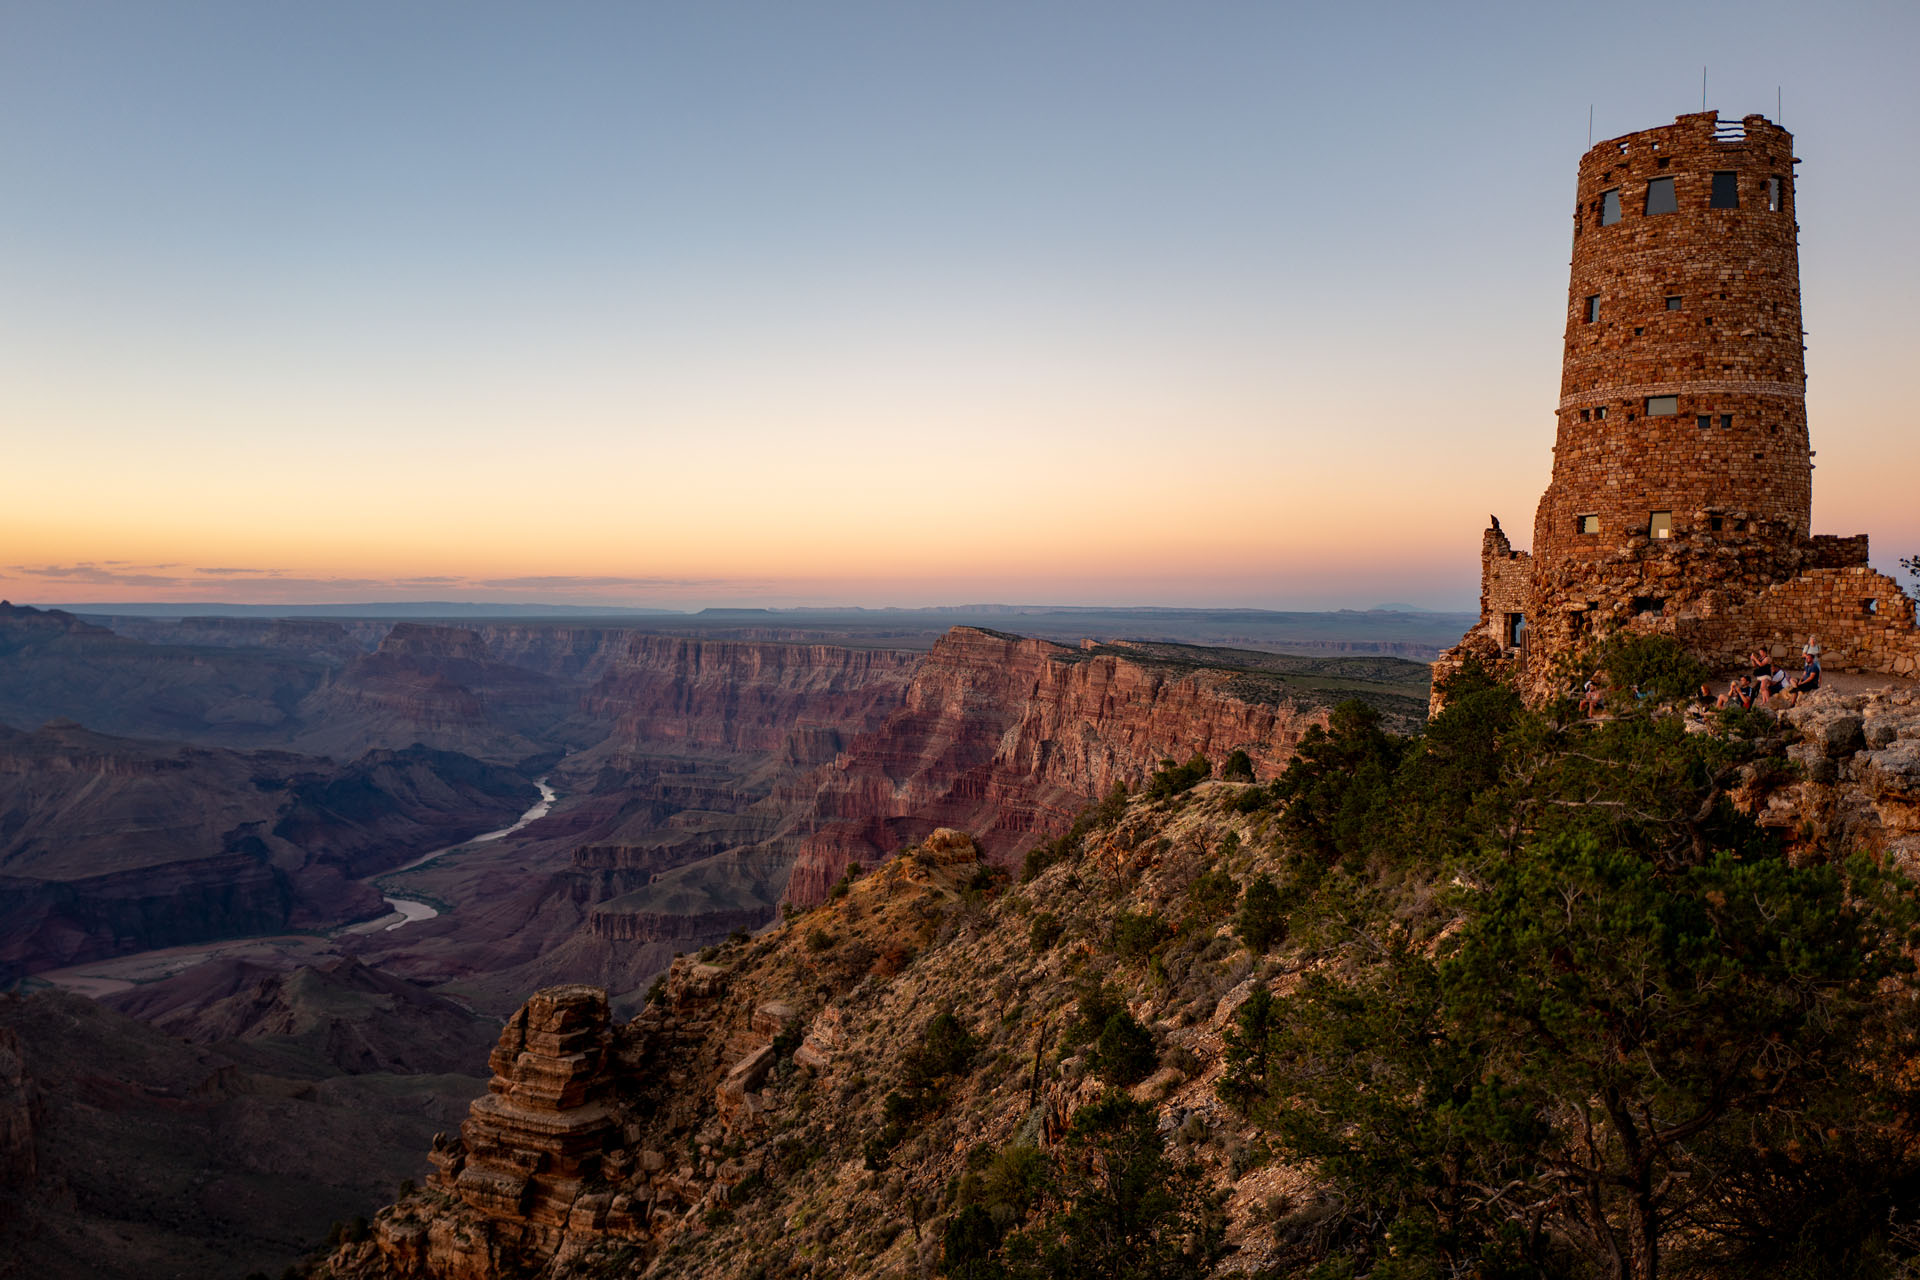 The'Desert Watch Tower' at Grand Canyon